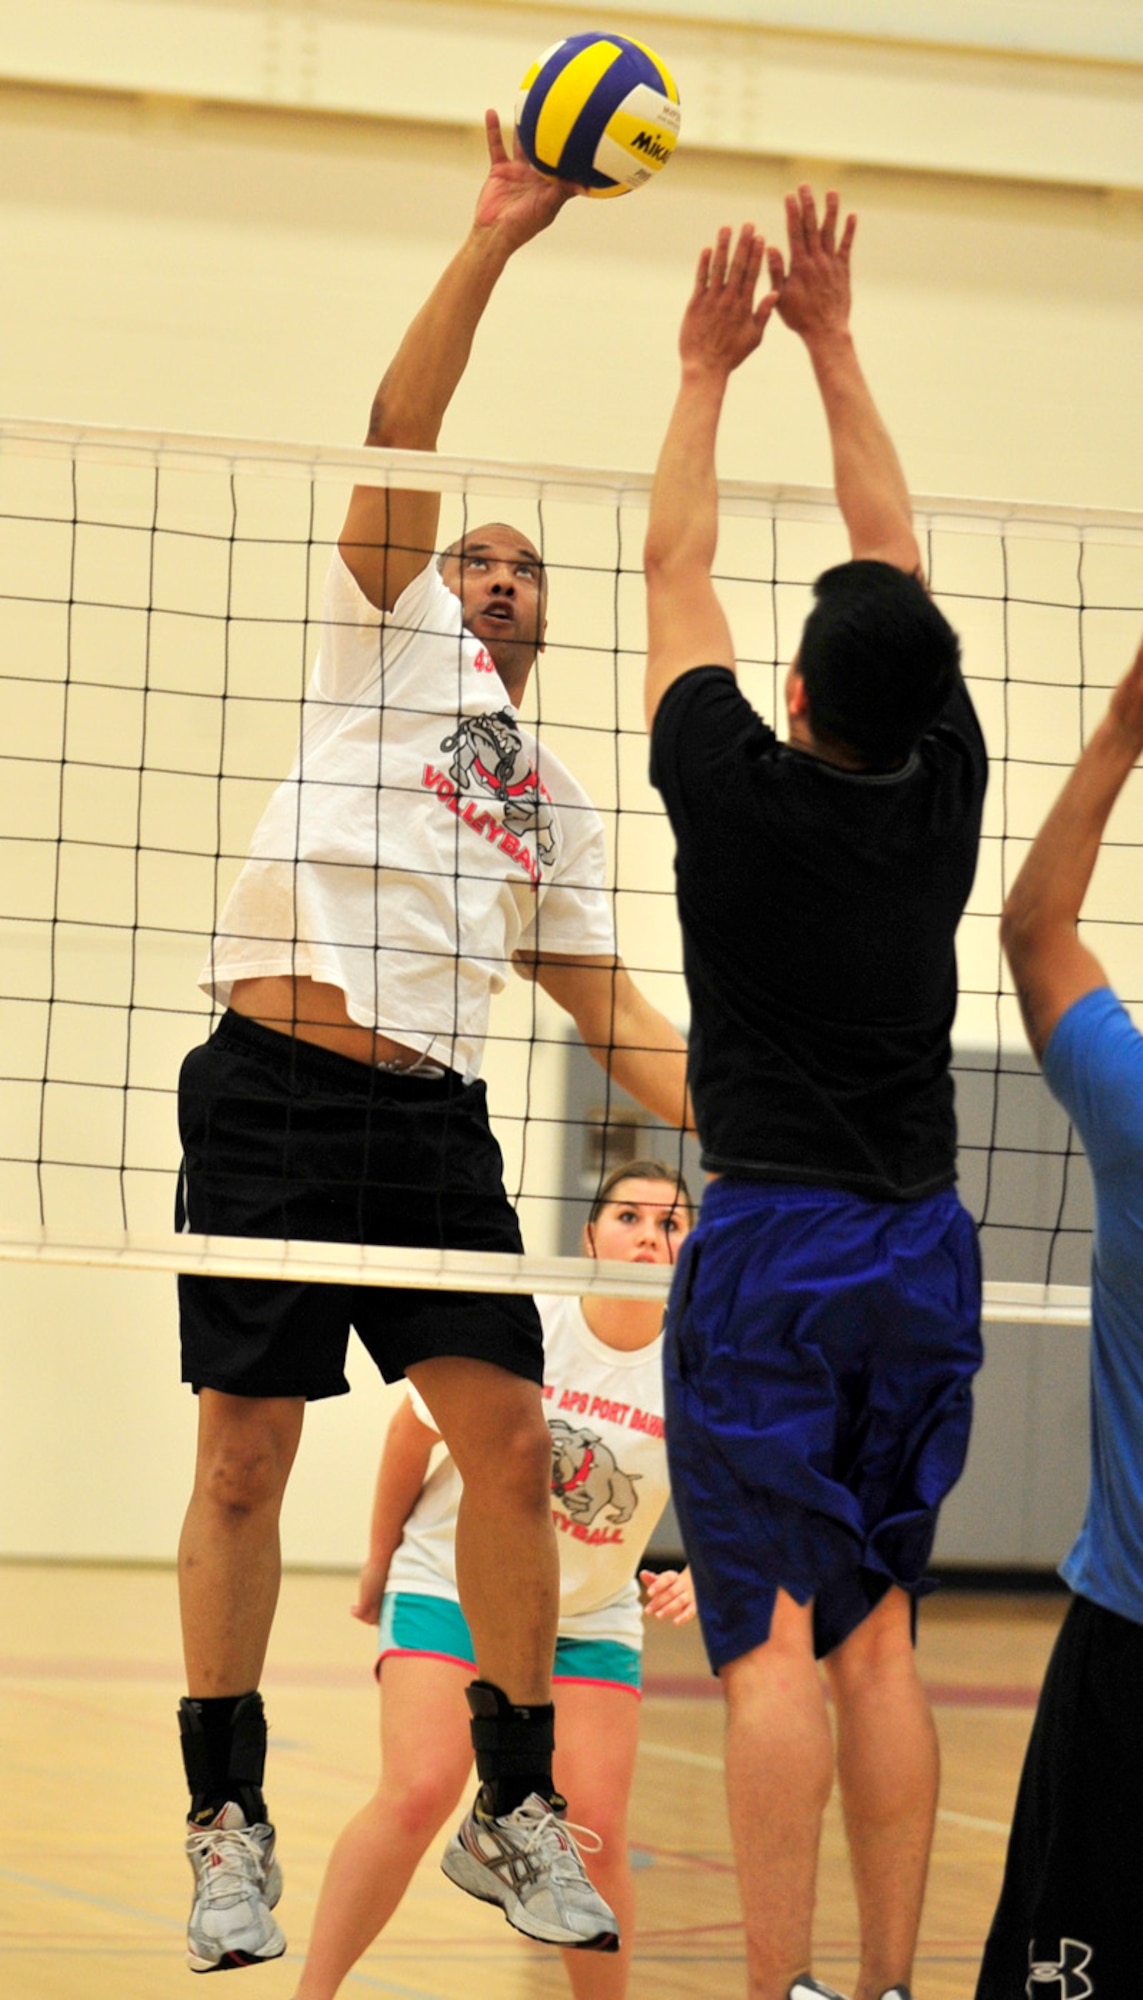 James McDonald, of the 436th Aerial Port Squadron, slams home a kill during an intramural volleyball game against the 436th Force Support Squadron April 30, 2013, at the fitness center on Dover Air Force Base, Del. The Port Dawgs swept the 436th FSS 25-21 and 25-15. (U.S. Air Force photo/Tech. Sgt. Chuck Walker)